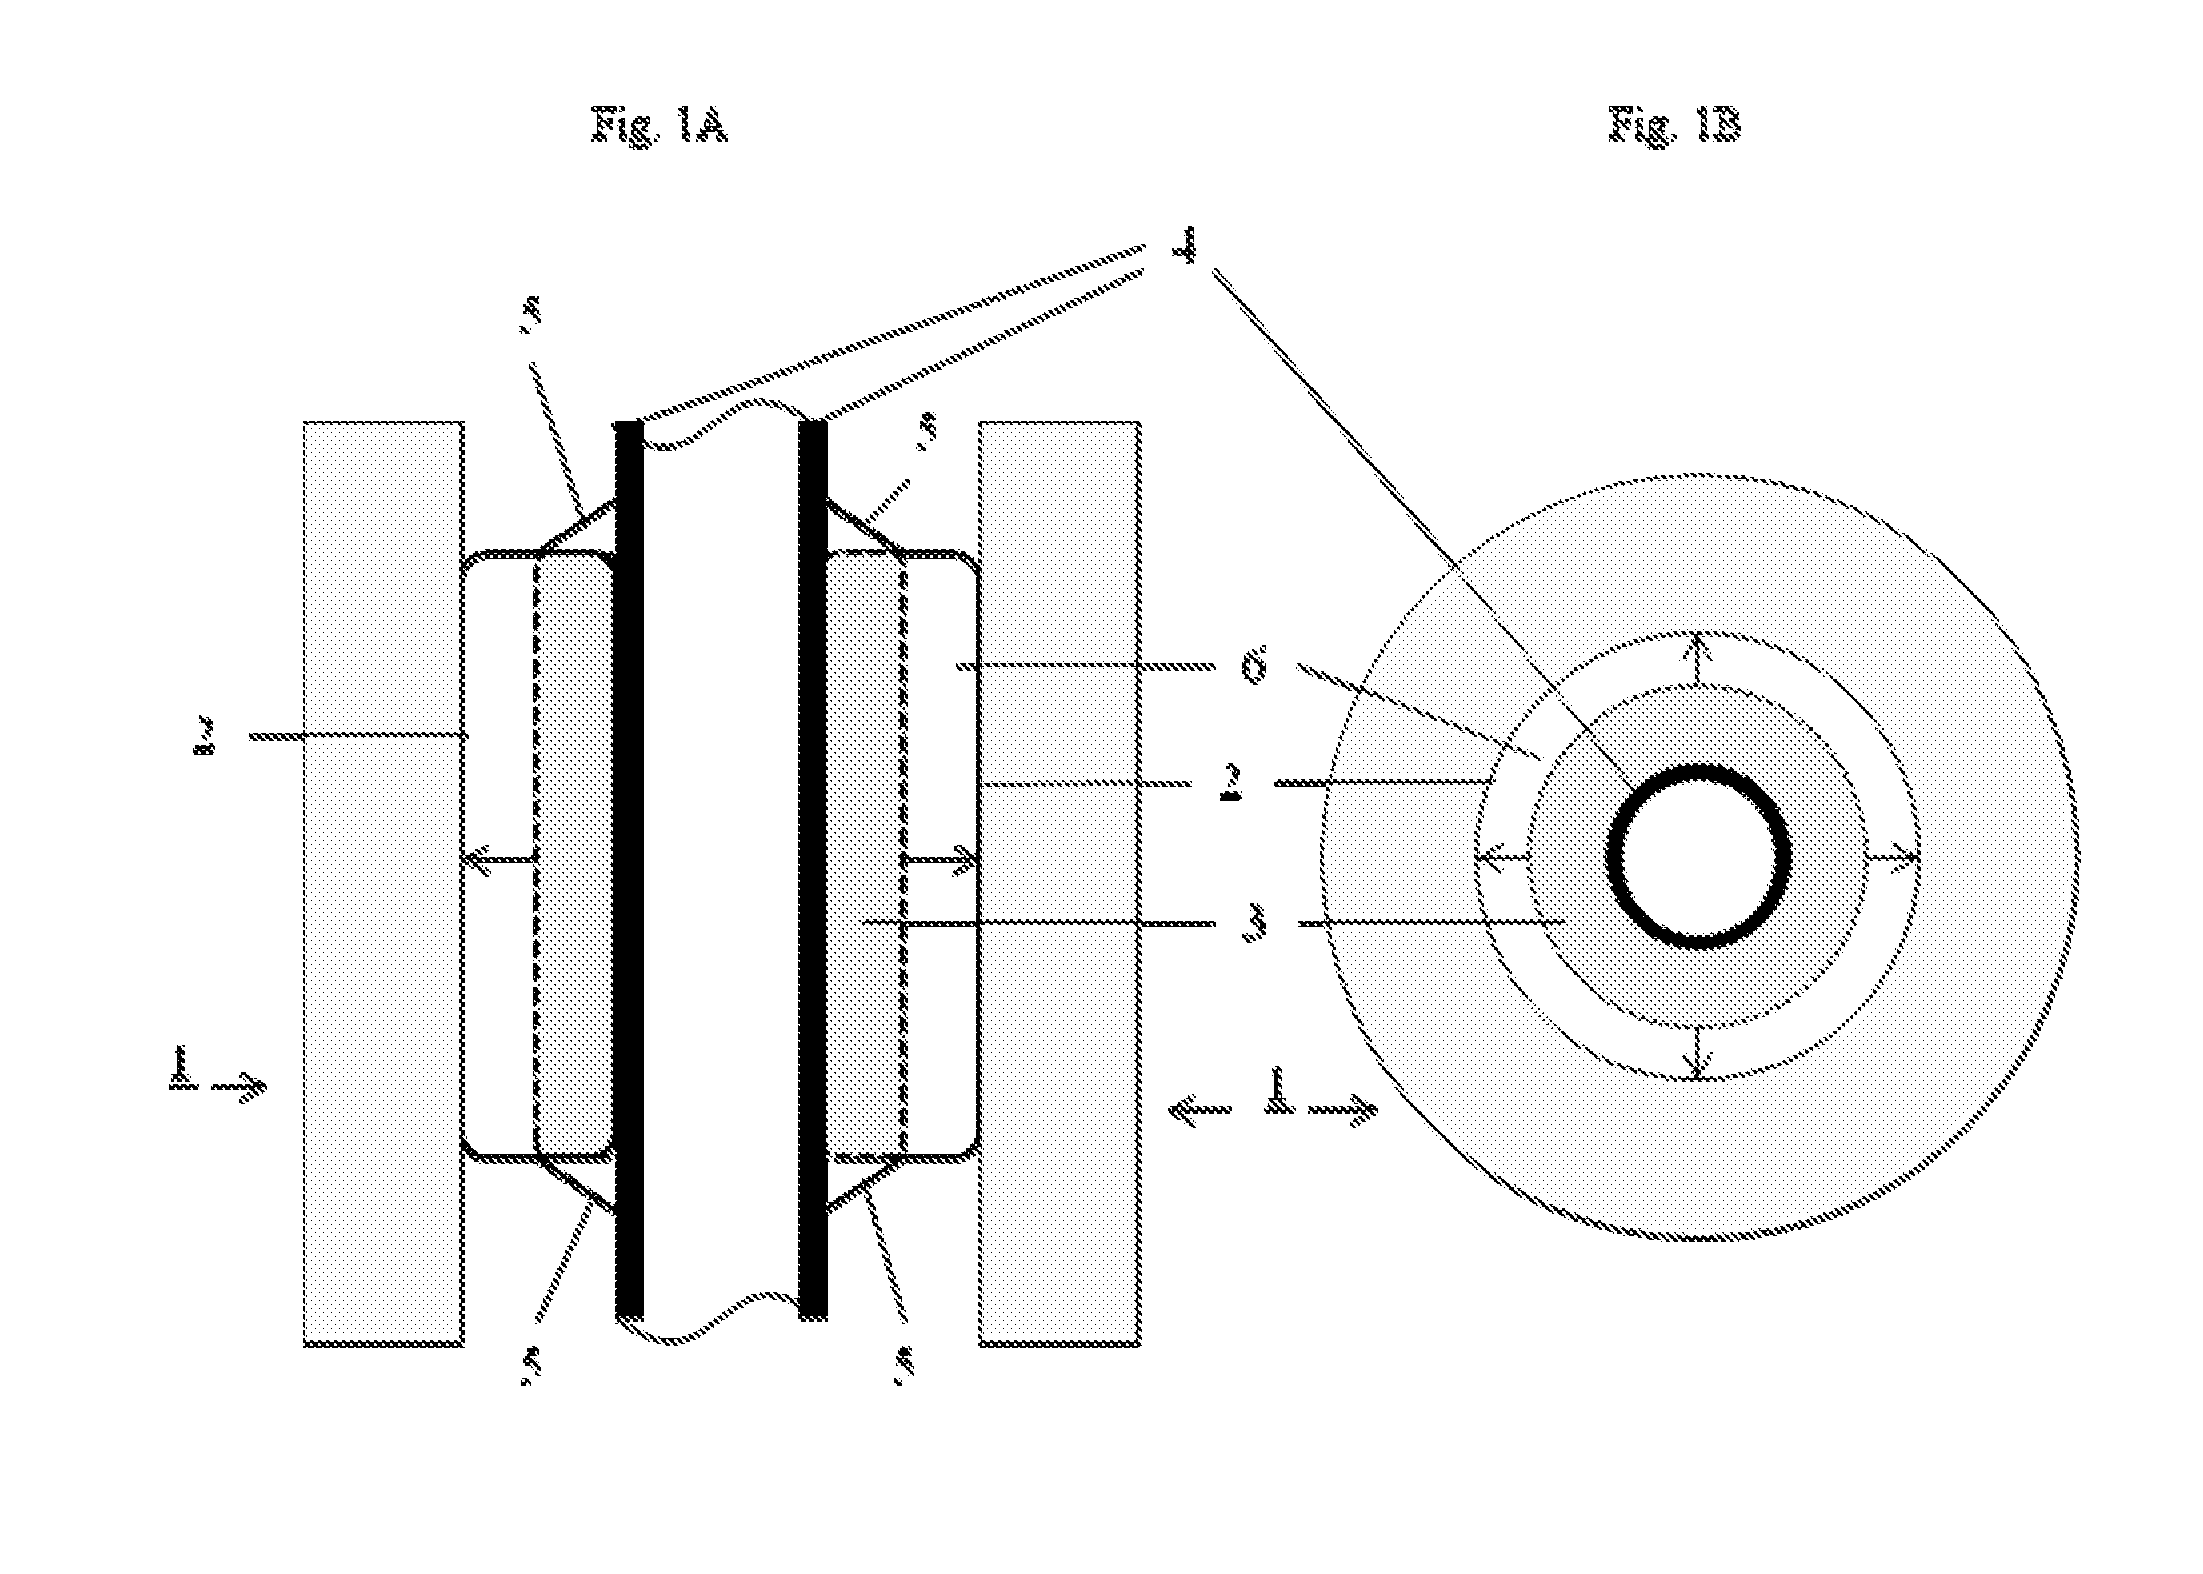 Water swellable rubber composition having stable swelling property at high temperatures